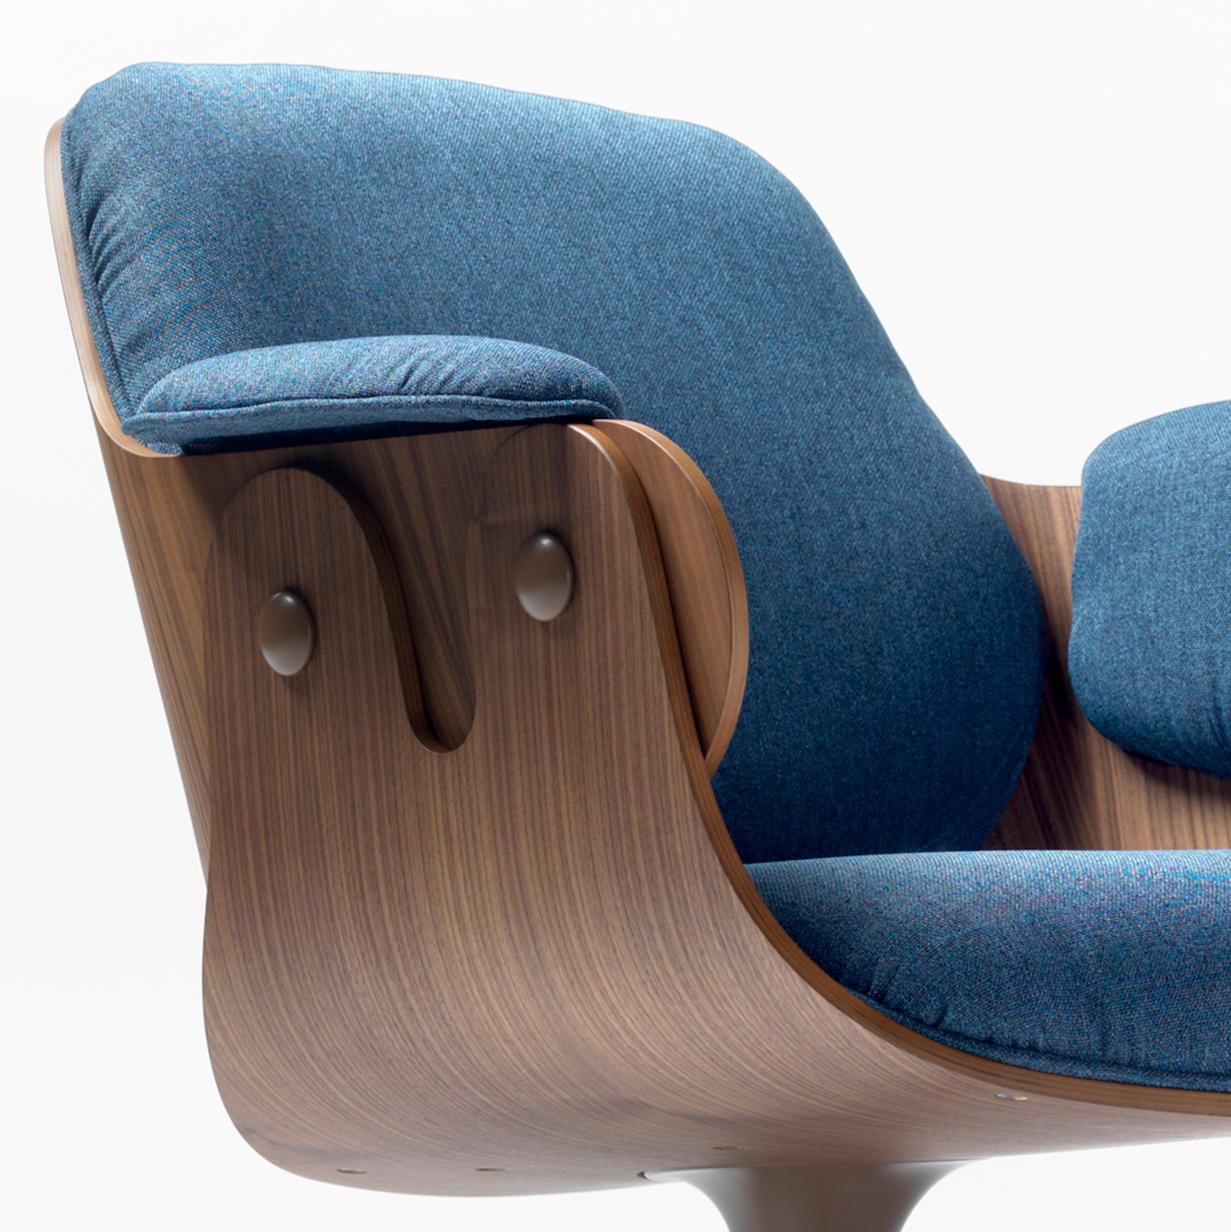 Modern Jaime Hayon, Contemporary, Walnut, Blue Upholstery Low Lounger Armchair For Sale